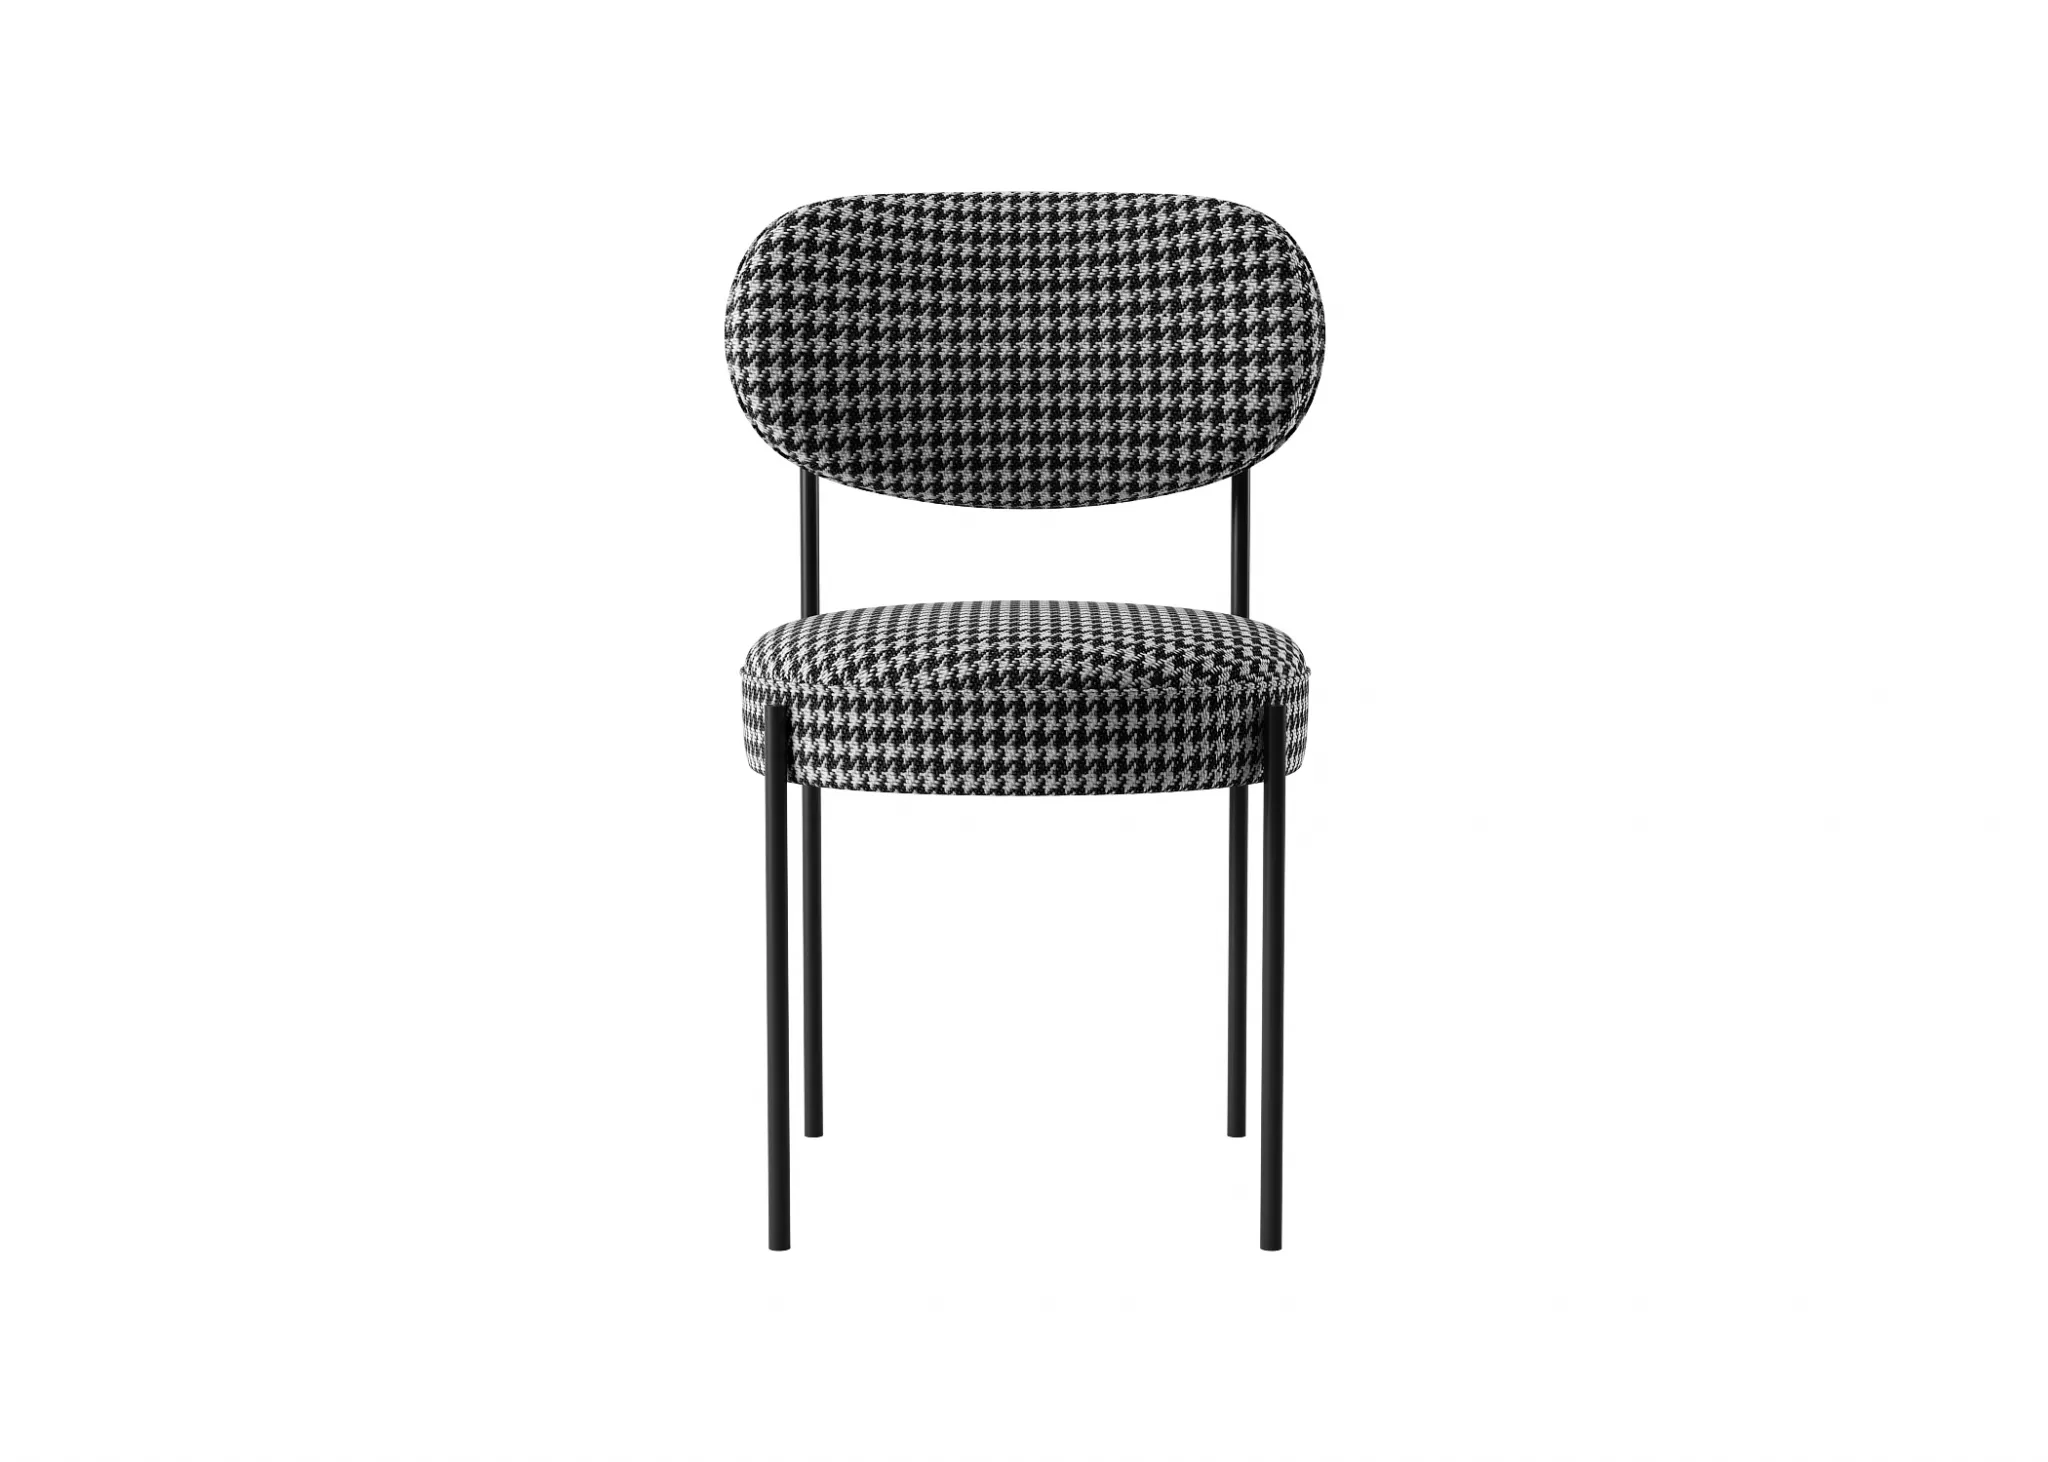 FURNITURE 3D MODELS – CHAIRS – 0370